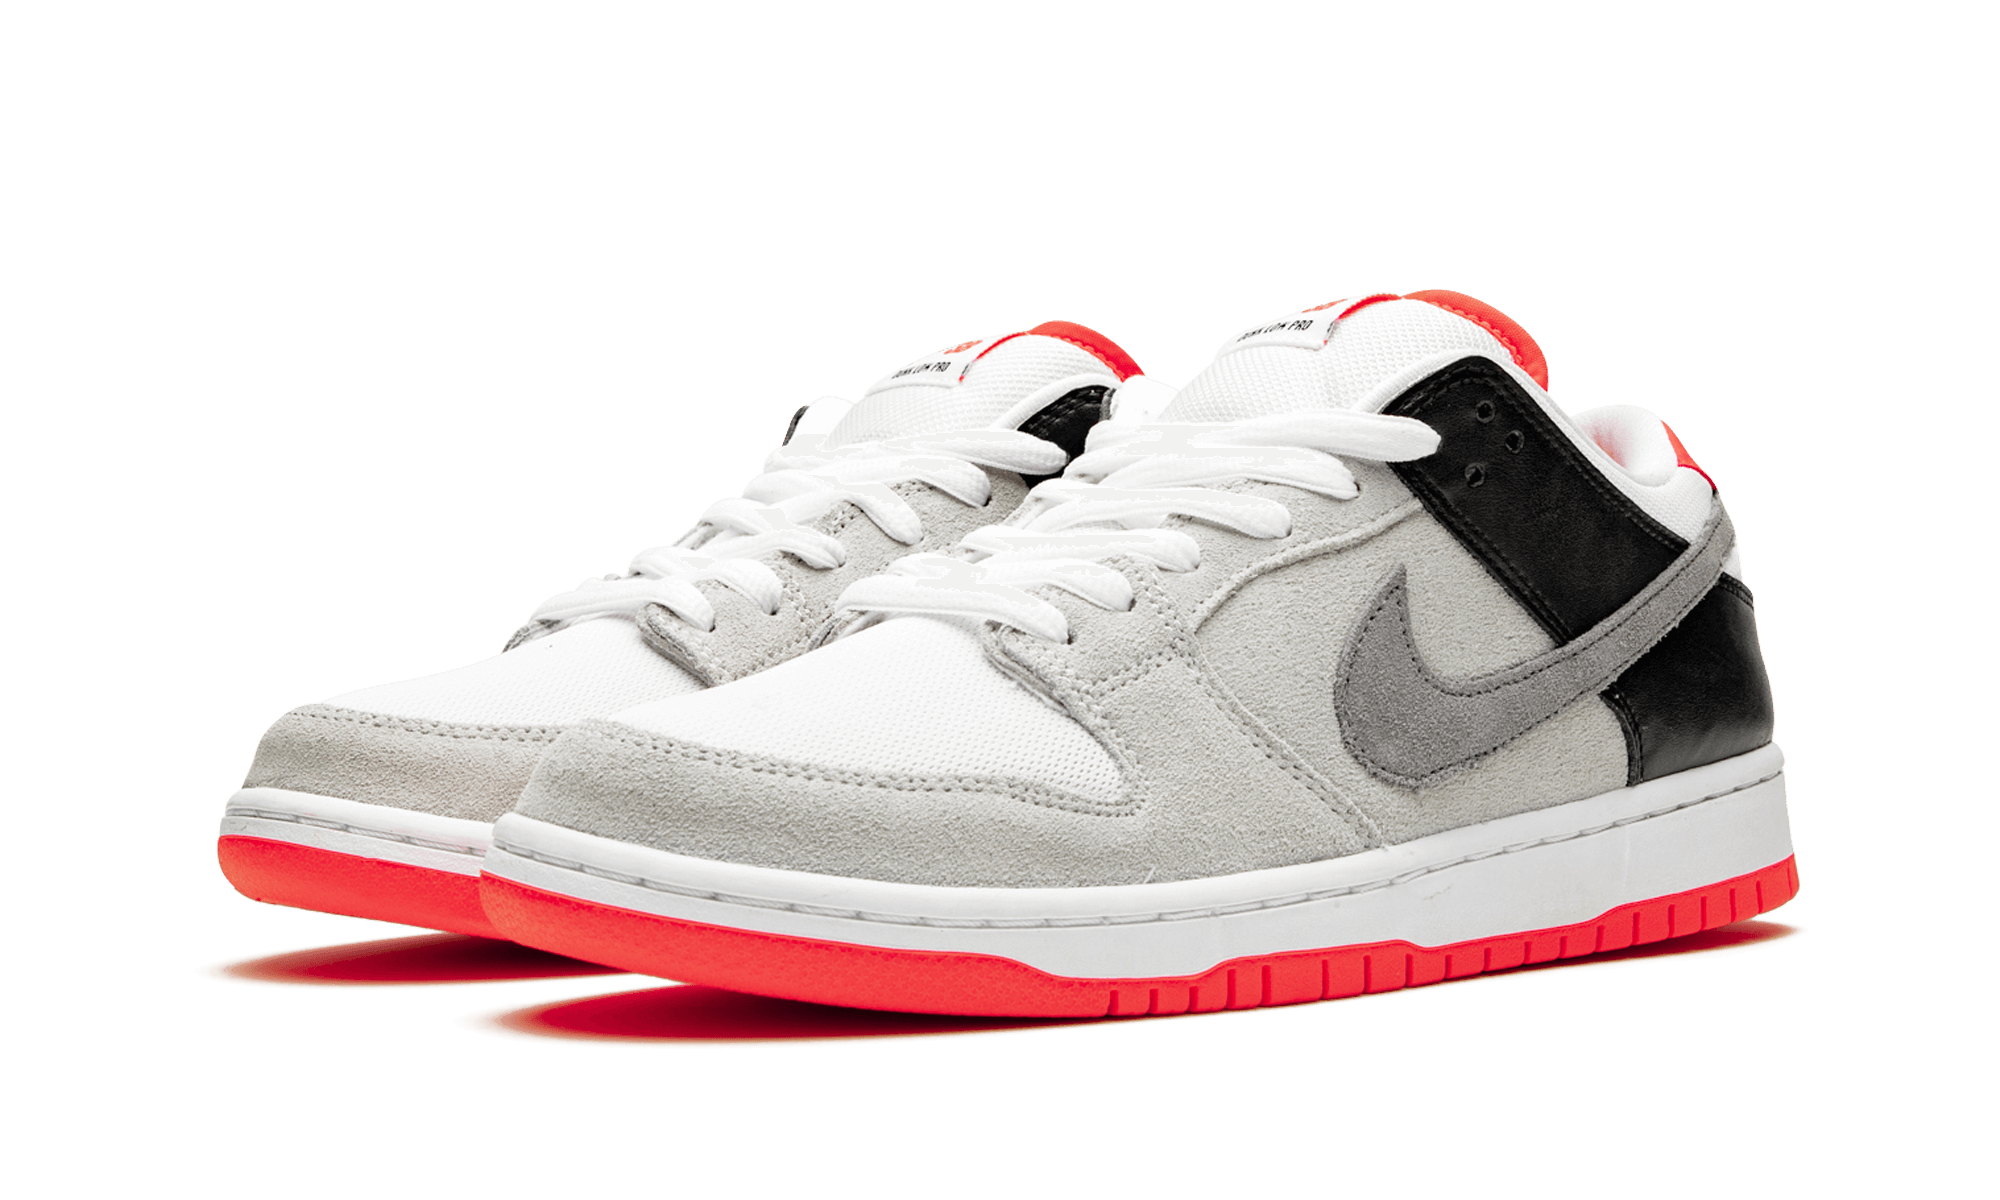 SB Dunk Low Infrared